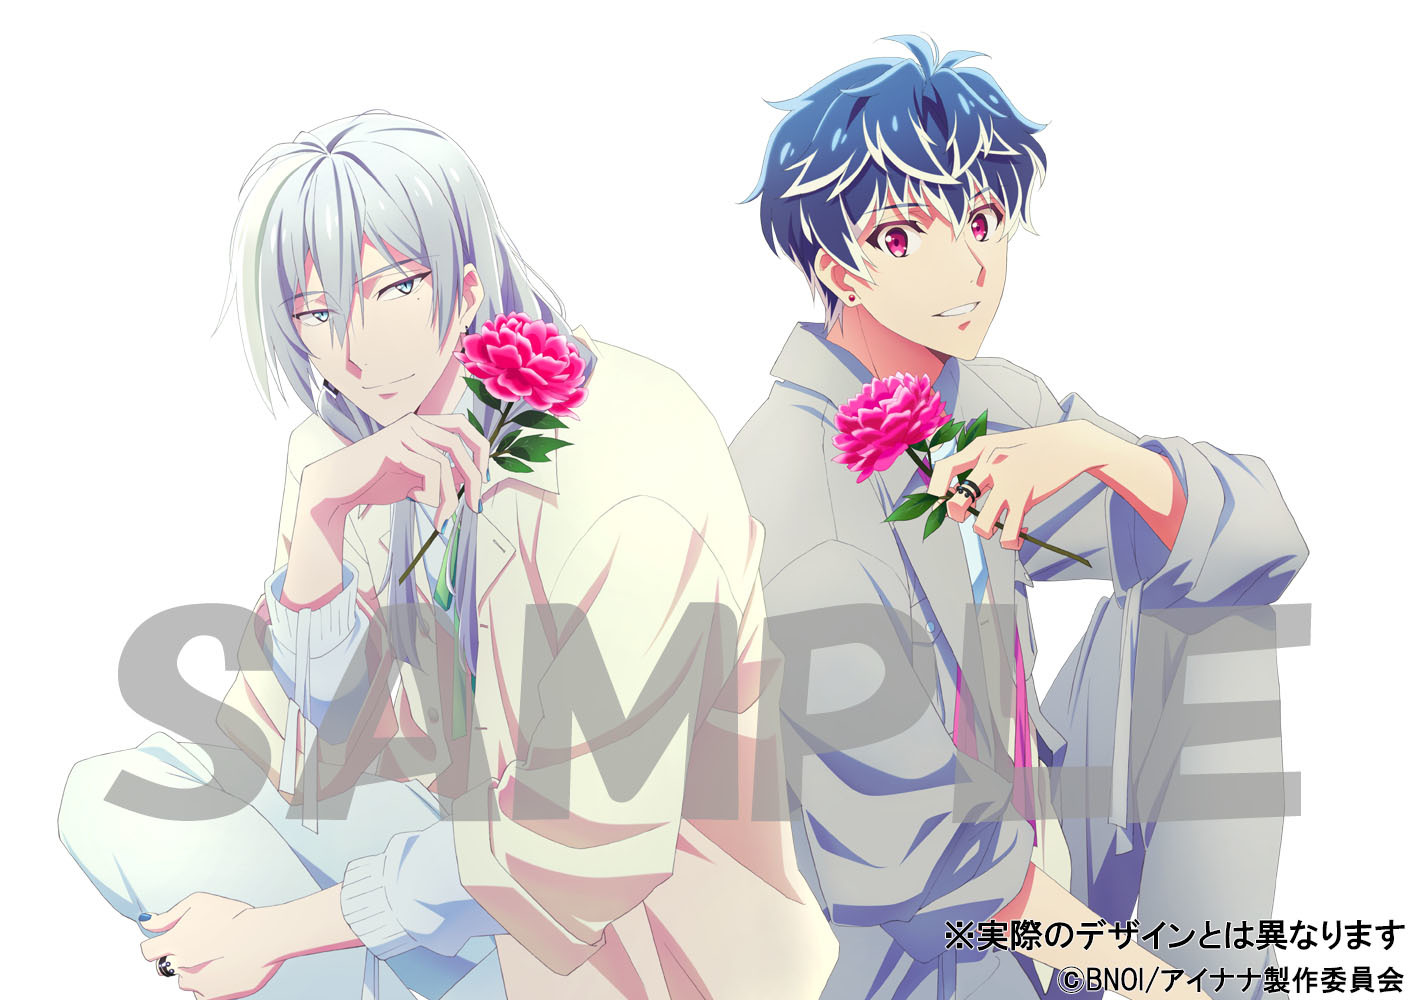  Re:vale